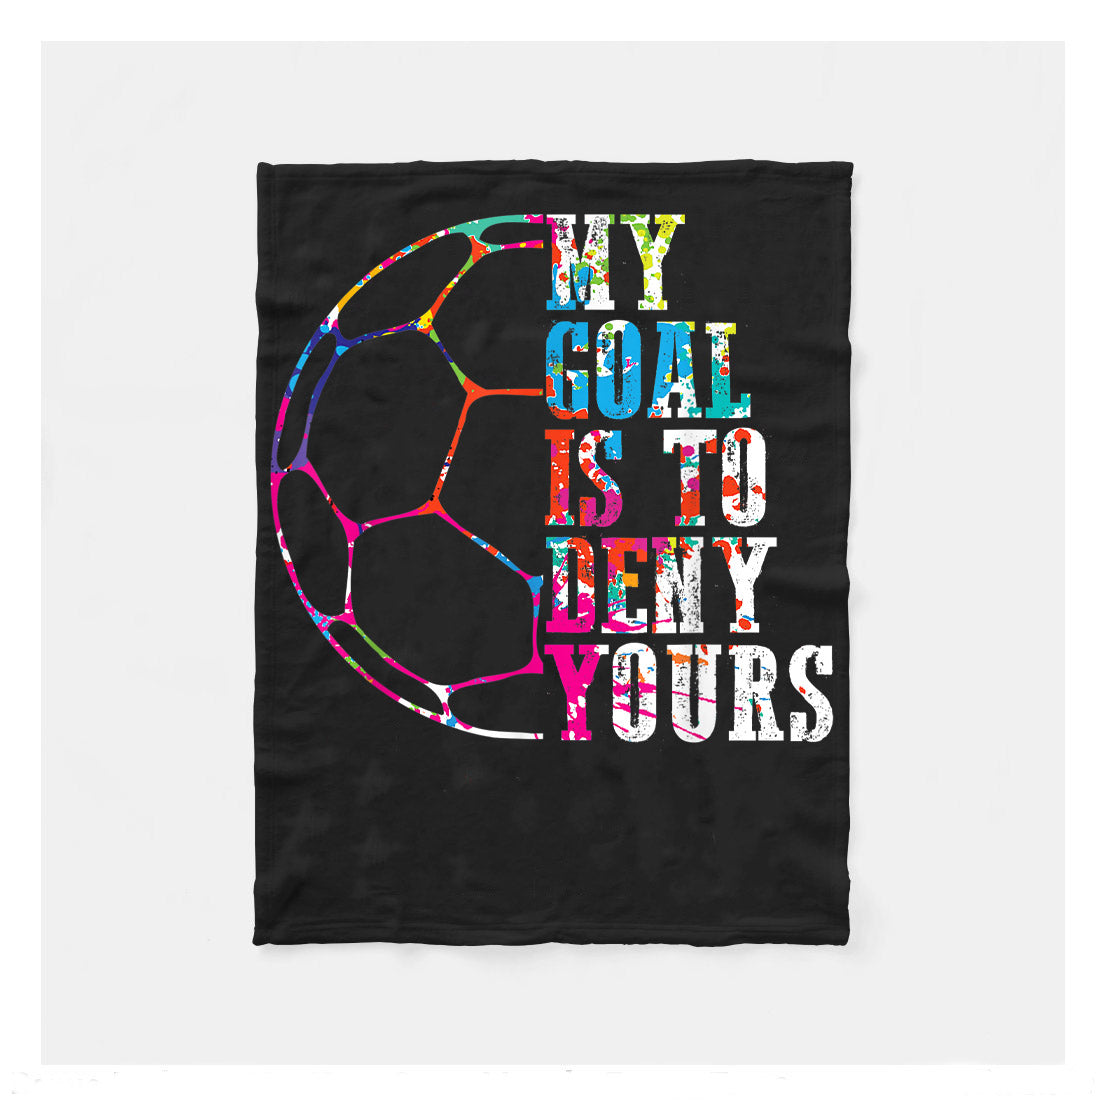 Funny My Goal Is To Deny Yours Soccer Goalie Defender Sherpa Blanket,  Soccer Outdoor Blankets, Soccer Gifts For Coach And Soccer Players, Birthday Gift For Soccer Player